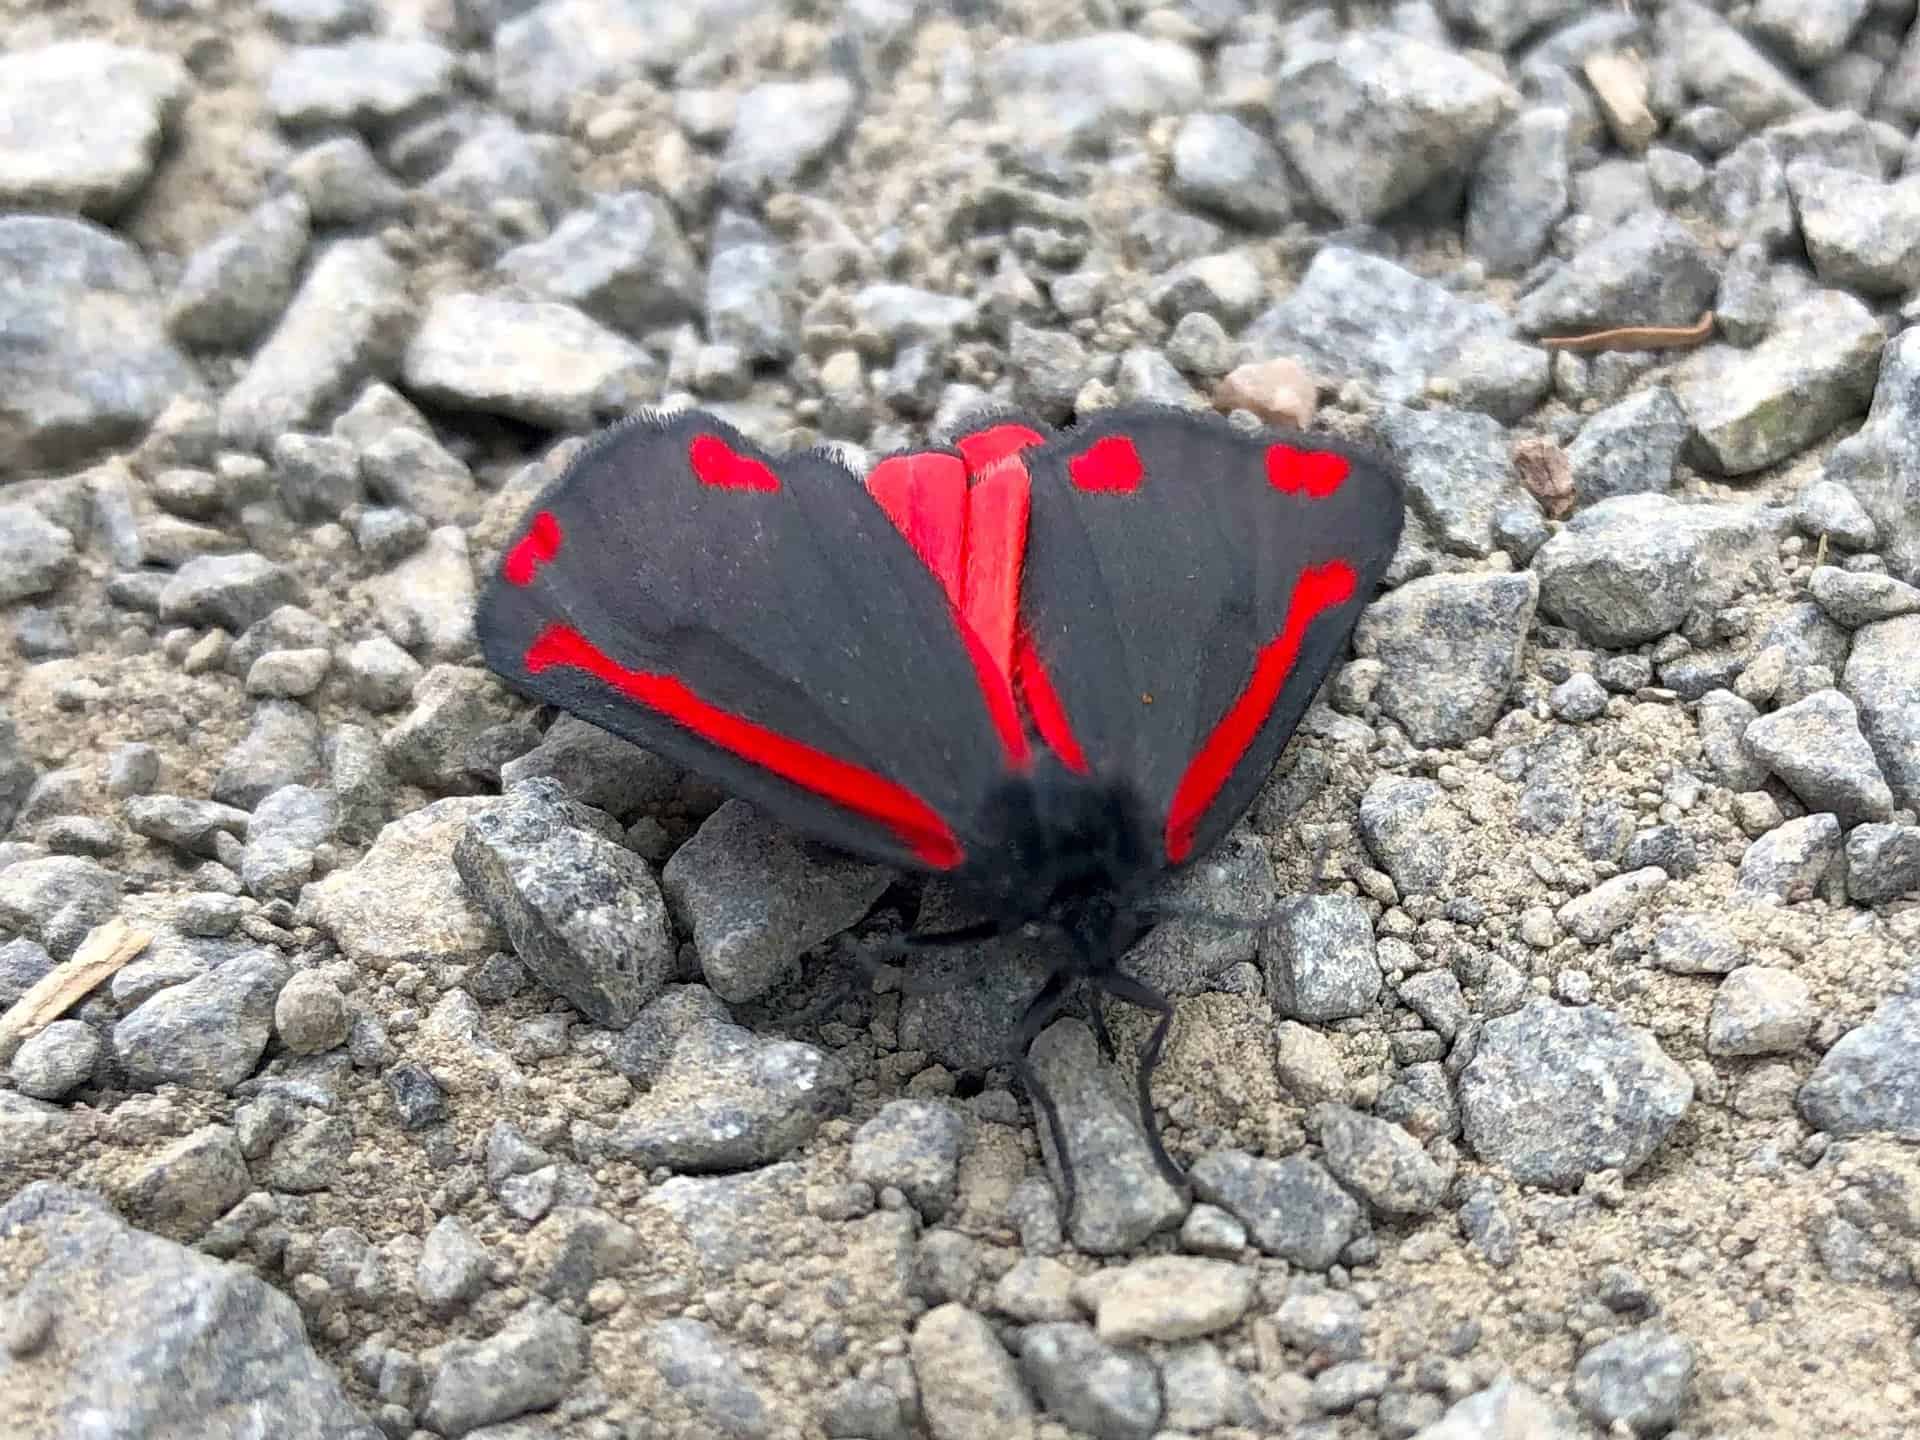 A Cinnabar moth, originally named after the bright red mineral ‘cinnabar’ once used by artists as a red pigment for painting. Visit https://www.buglife.org.uk/bugs-and-habitats/cinnabar-moth for more information.